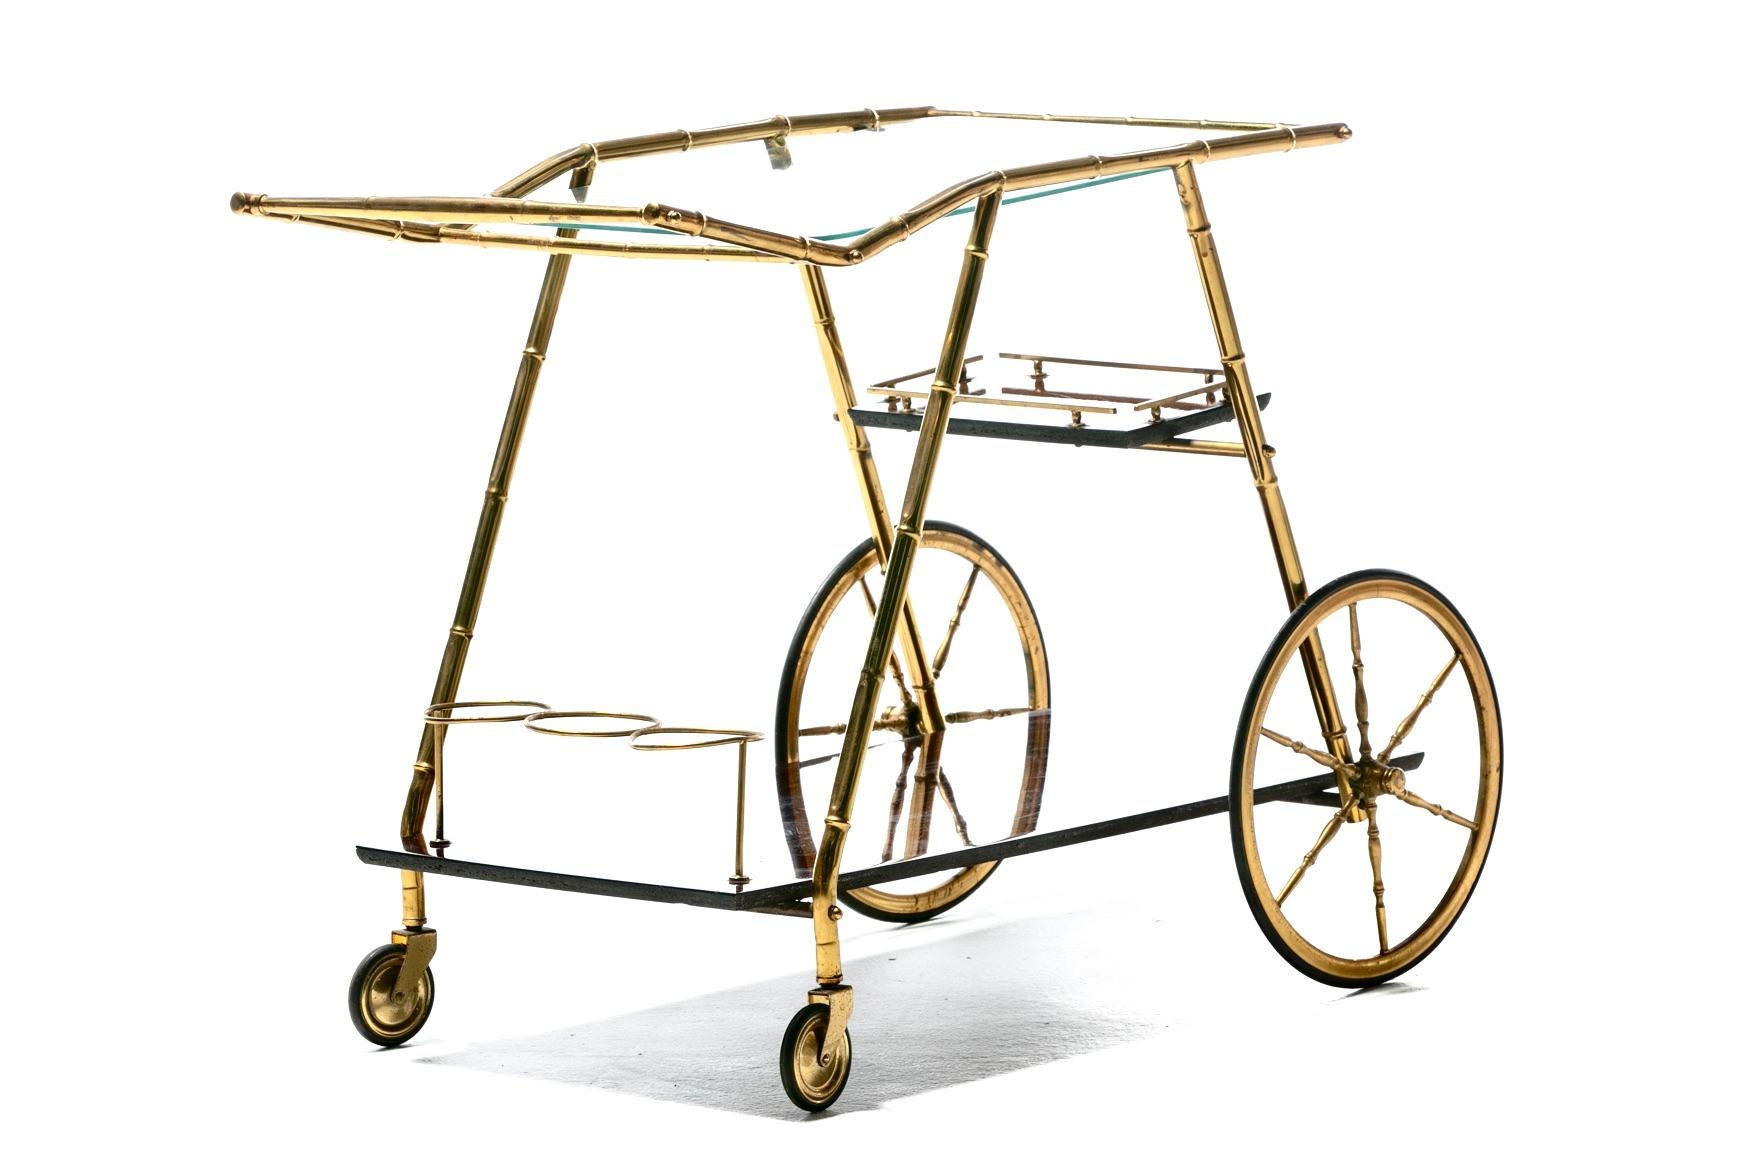 Italian Hollywood Regency Brass Faux Bamboo & Wood Bar Cart circa 1960s In Good Condition For Sale In Saint Louis, MO